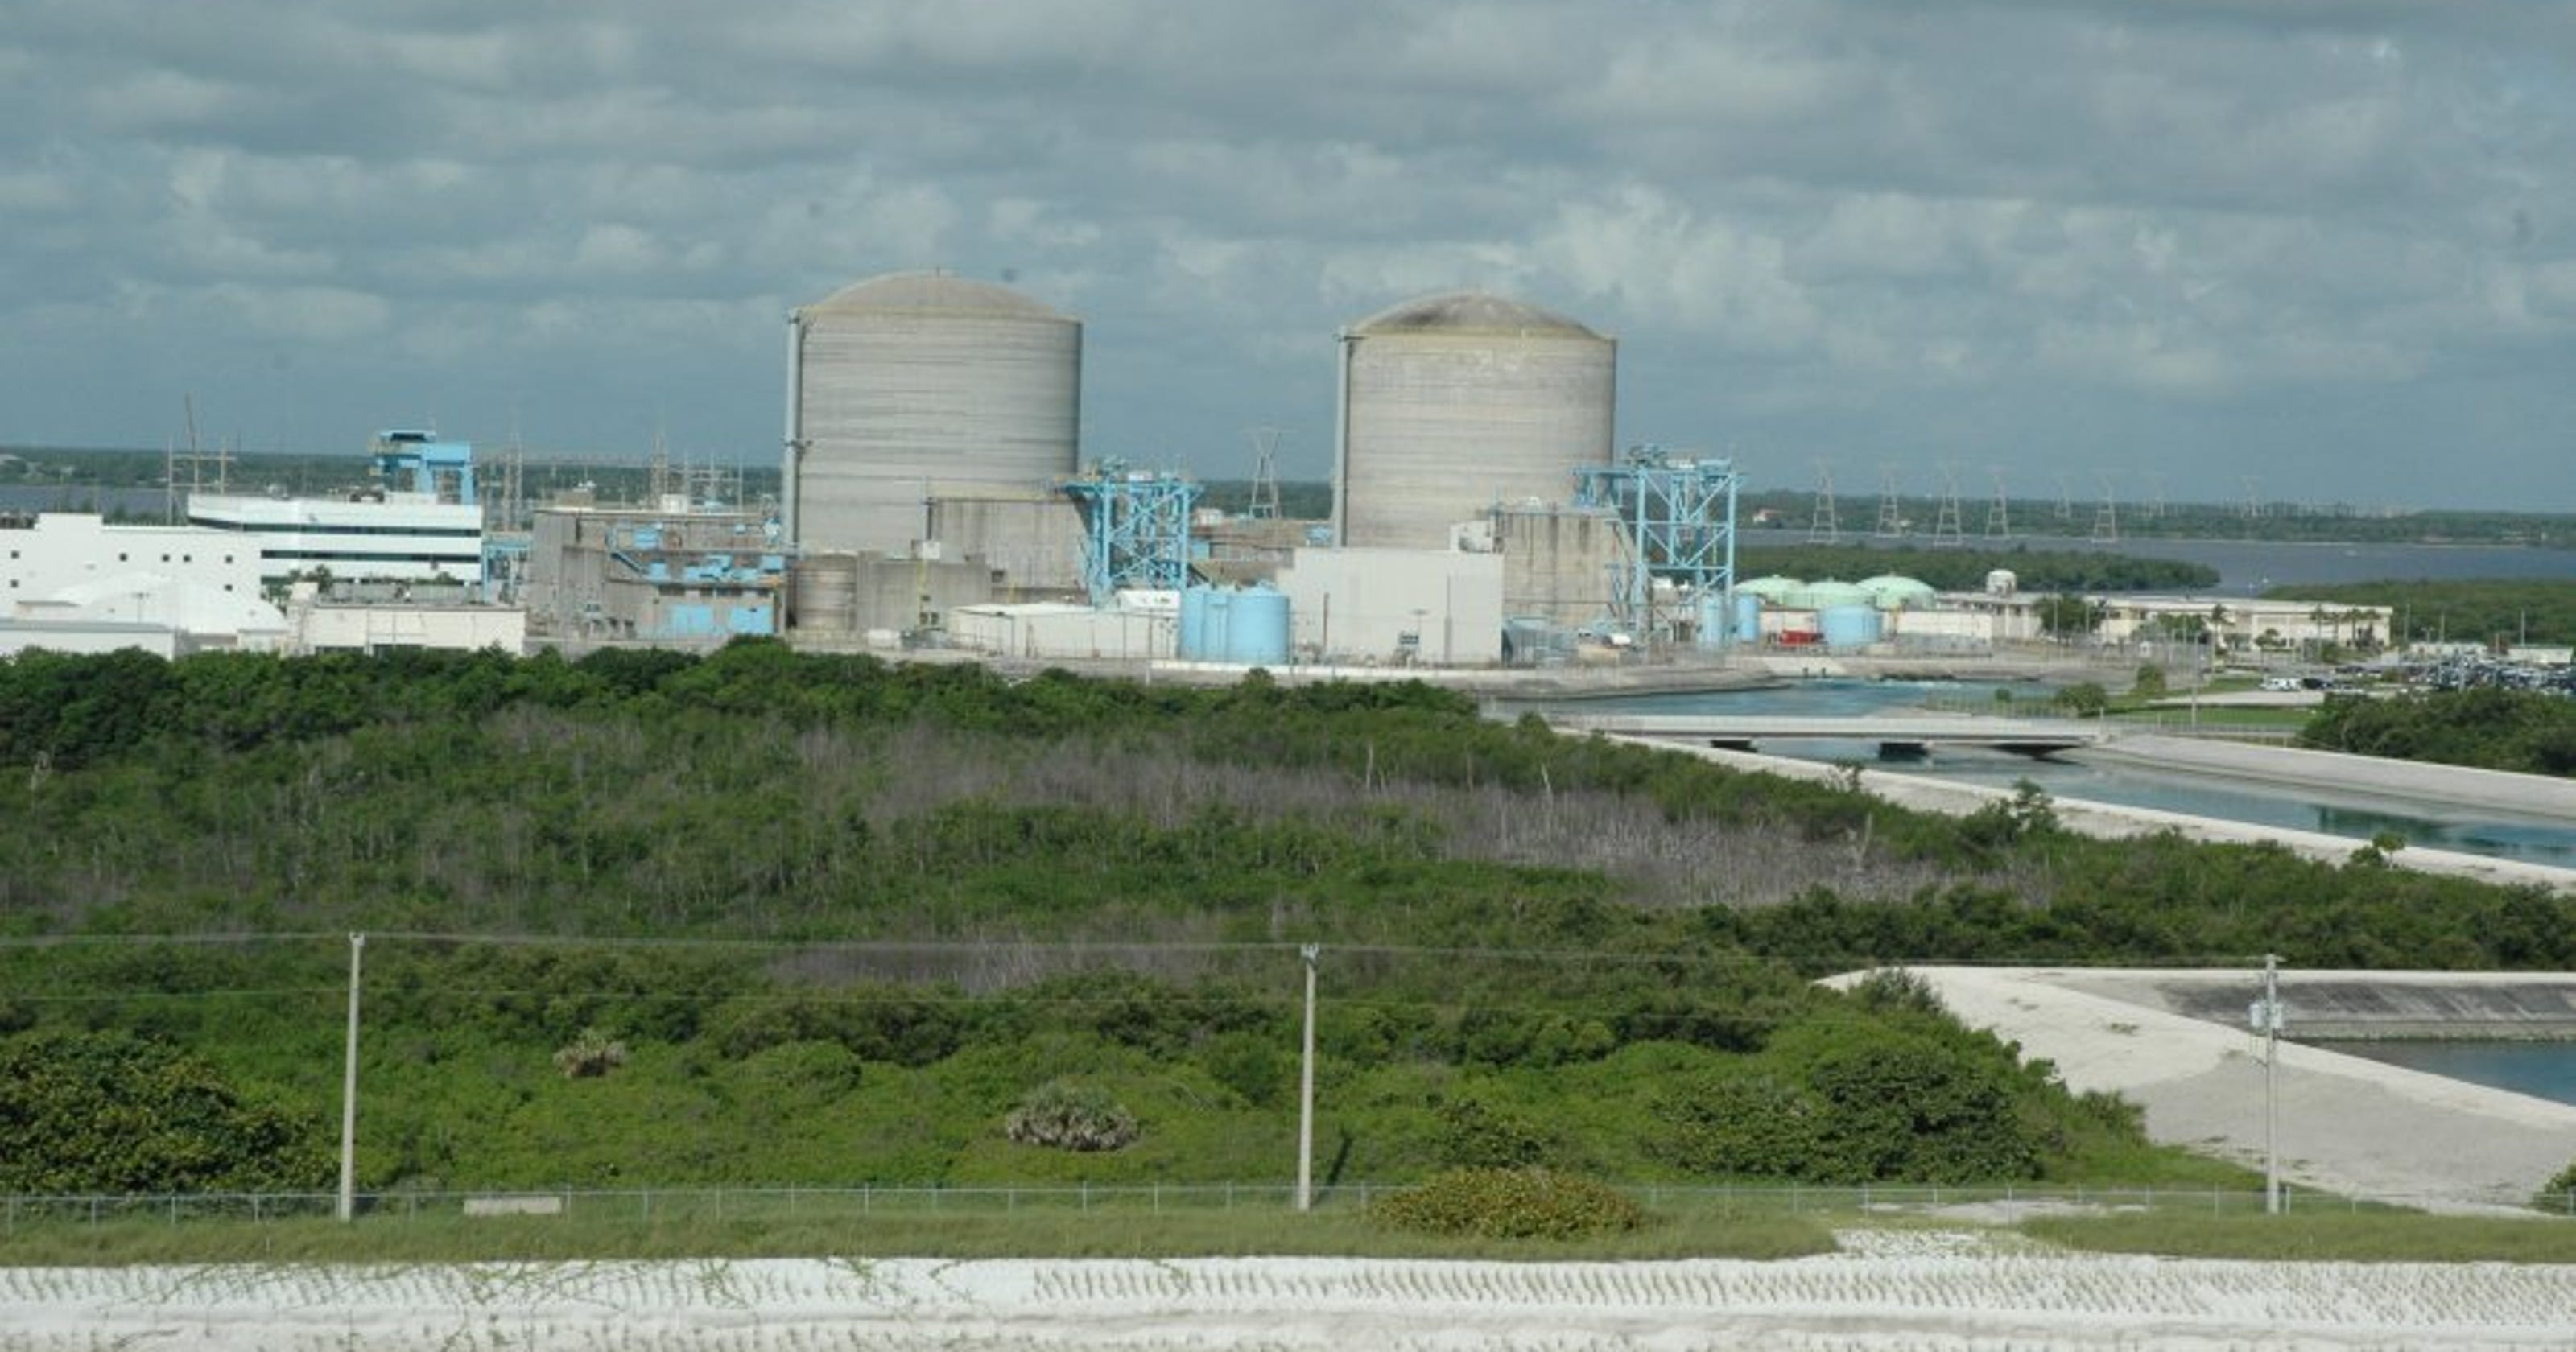 FPL's St. Lucie Nuclear Power Plant to test outdoor sirens